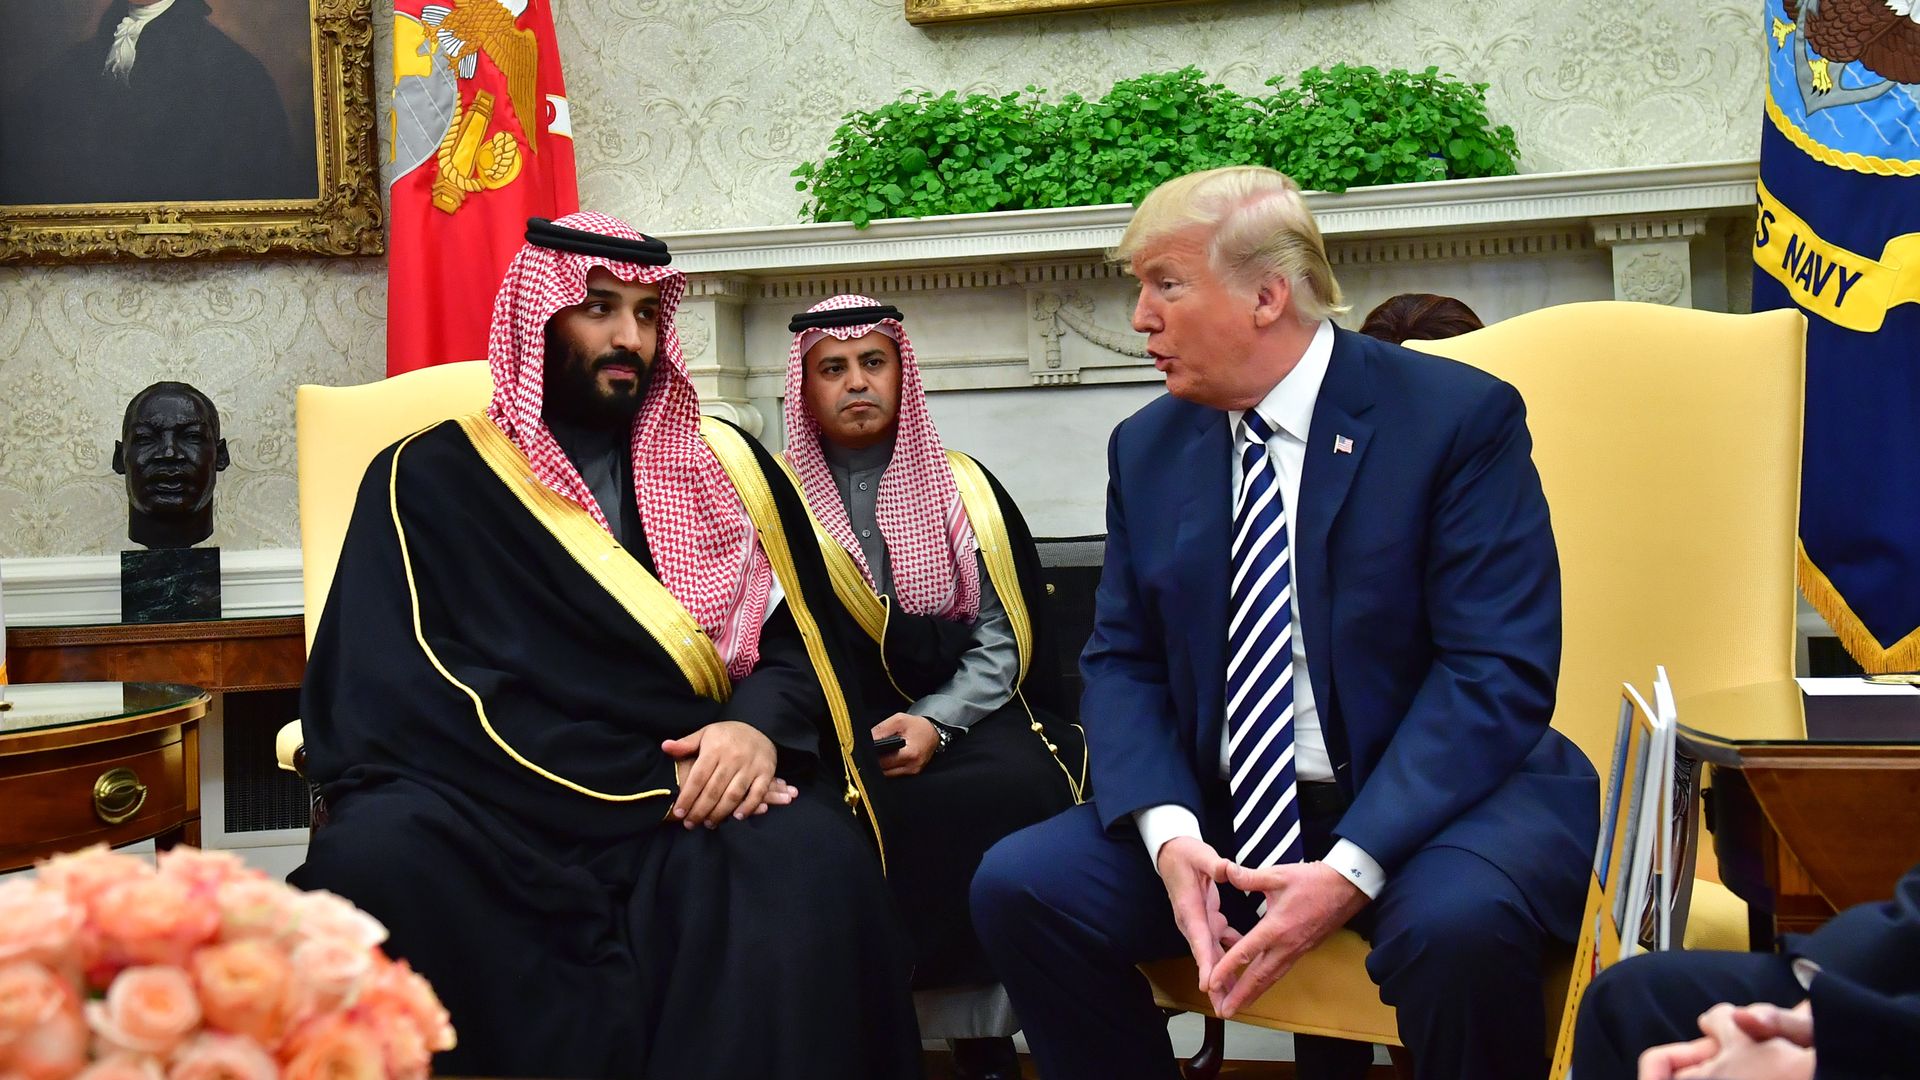 Saudi Crown Prince MBS and President Trump in Oval Office